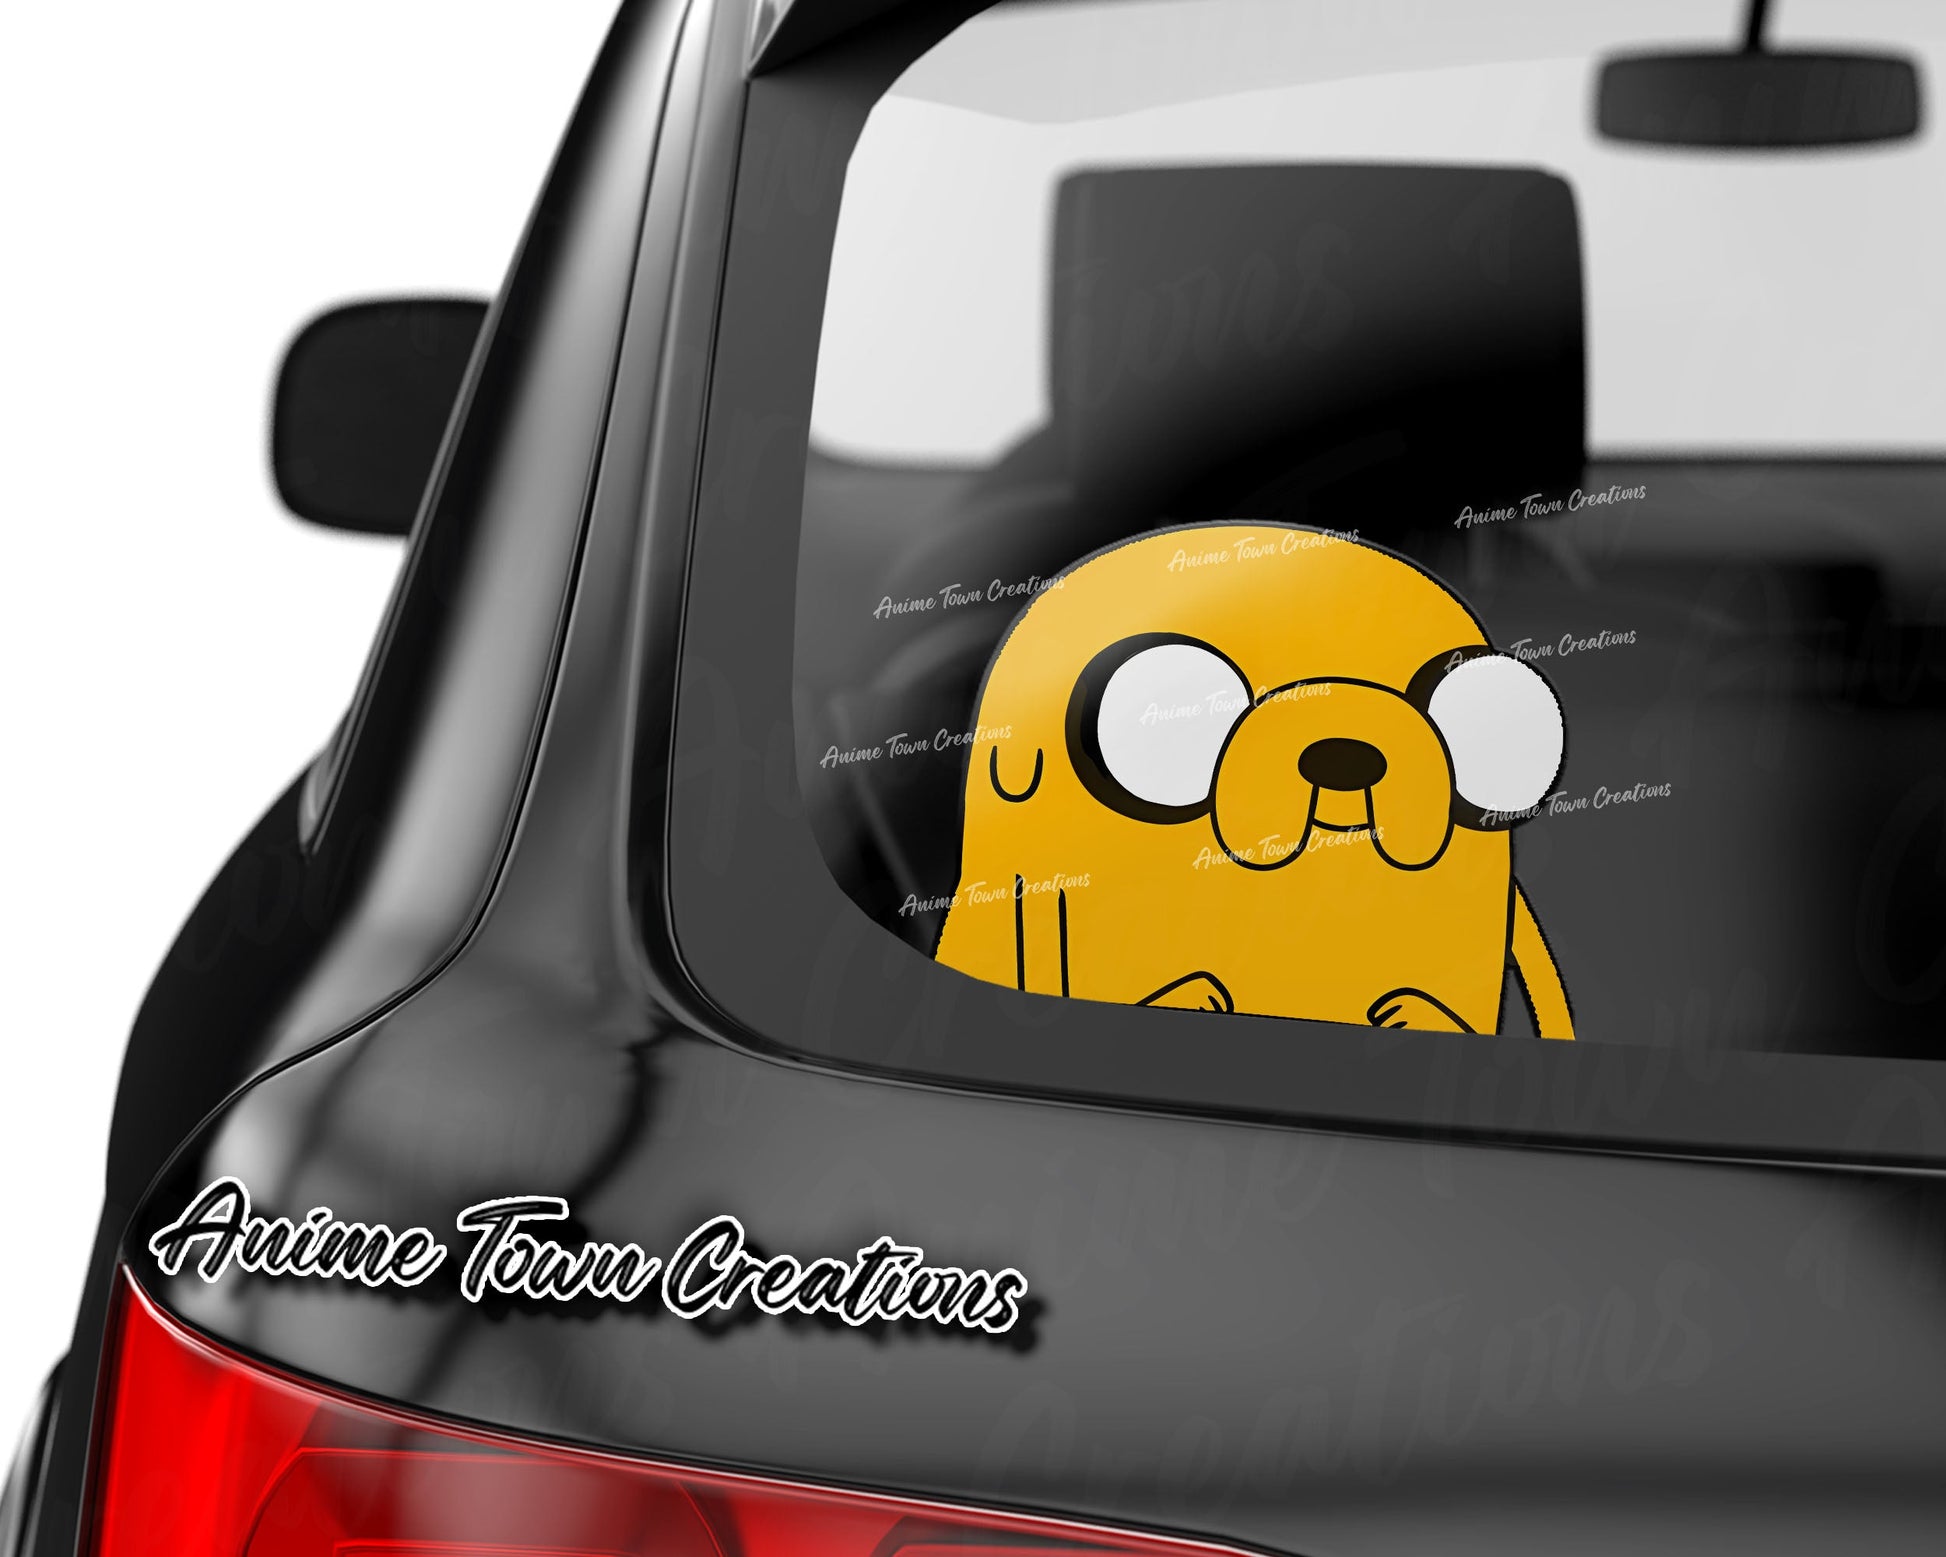 Anime Town Creations Sticker Adventure Time Jake 8" Accessories - Anime Adventure Time Sticker